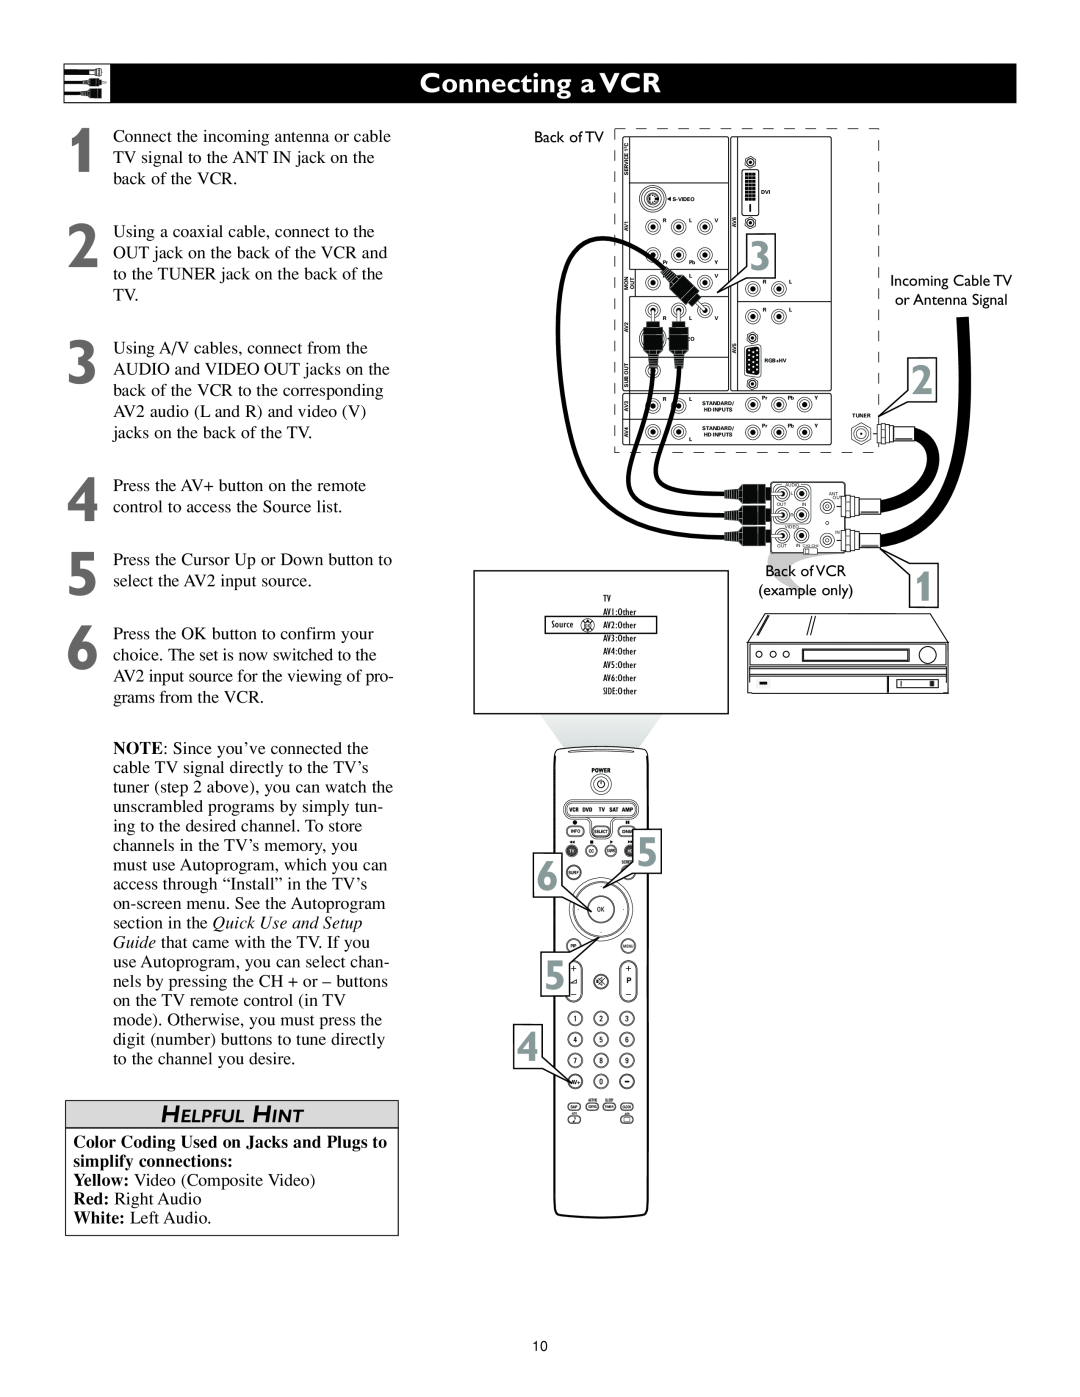 Philips 62PL9524, 55PL9524 Connecting a VCR, Helpful Hint, Color Coding Used on Jacks and Plugs to simplify connections 